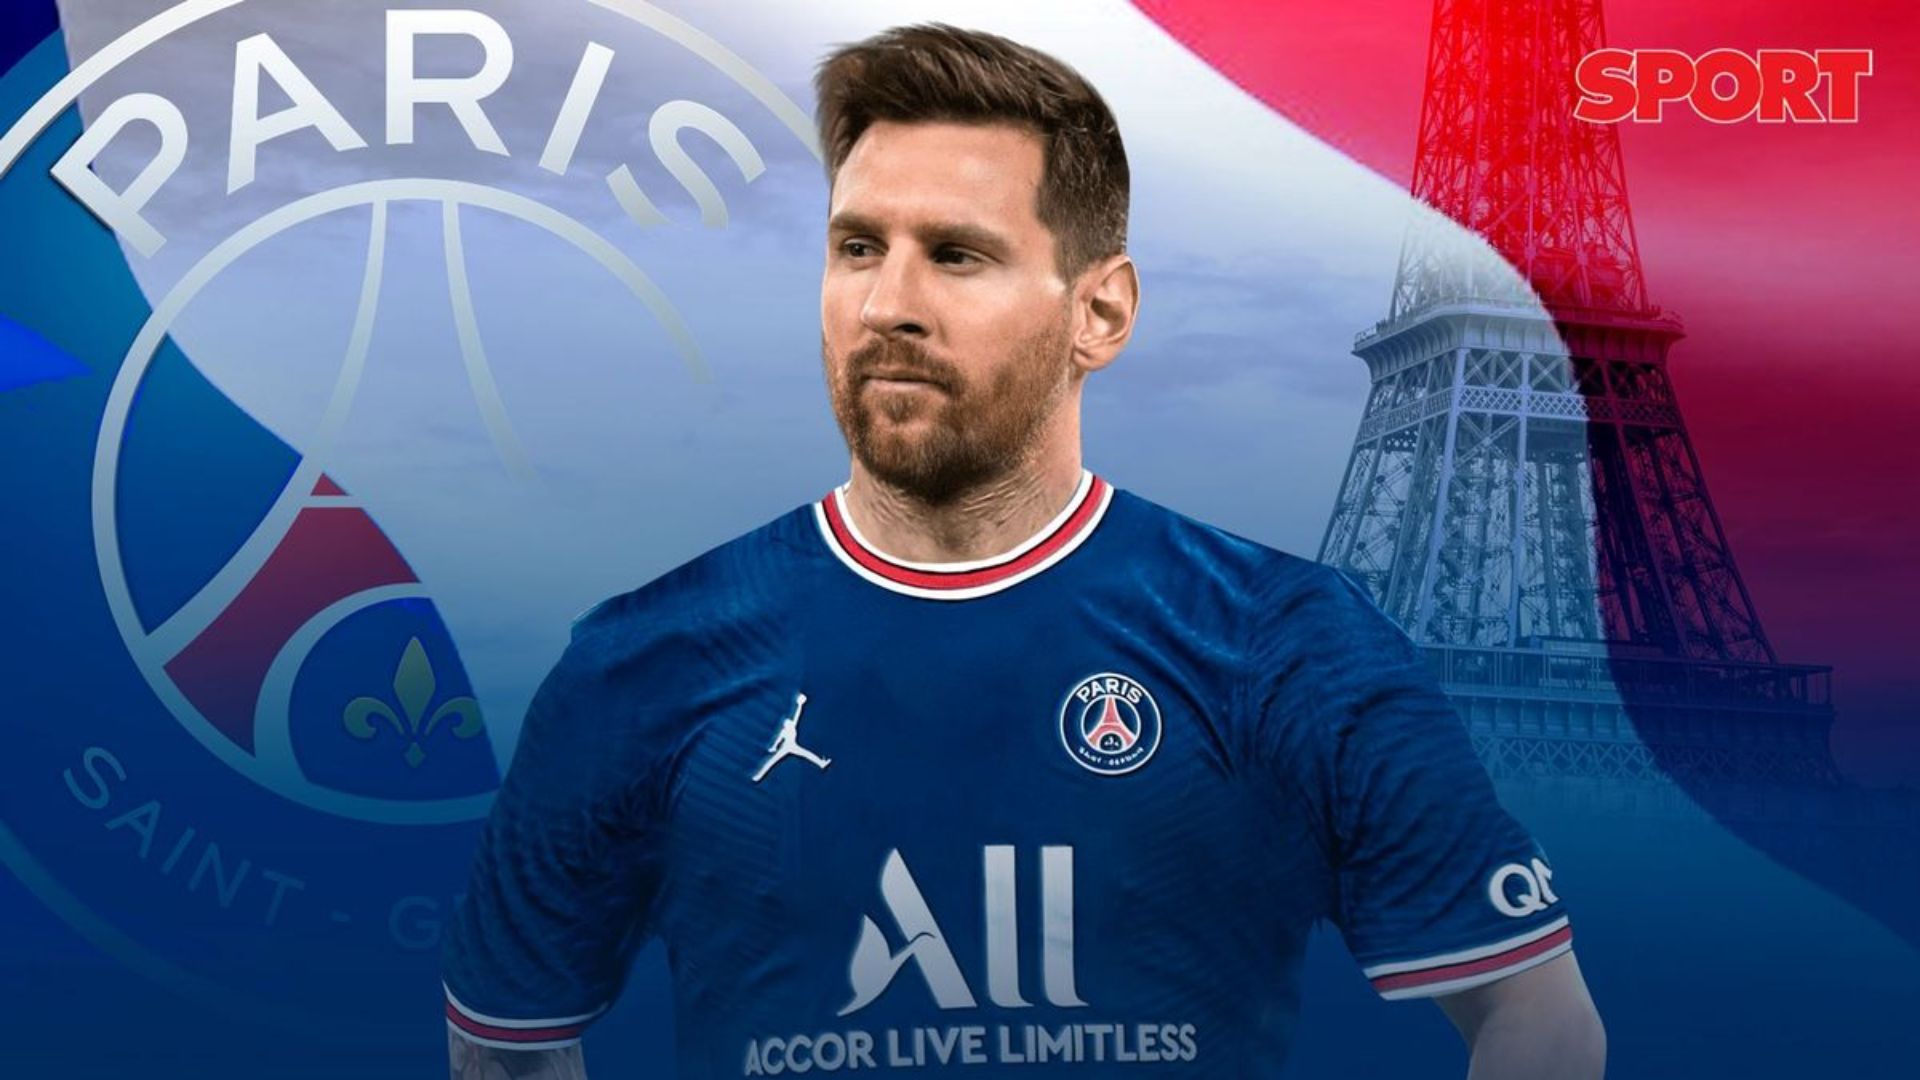 Lionel Messi PSG Wallpapers   Top Best Messi PSG Pictures Photos